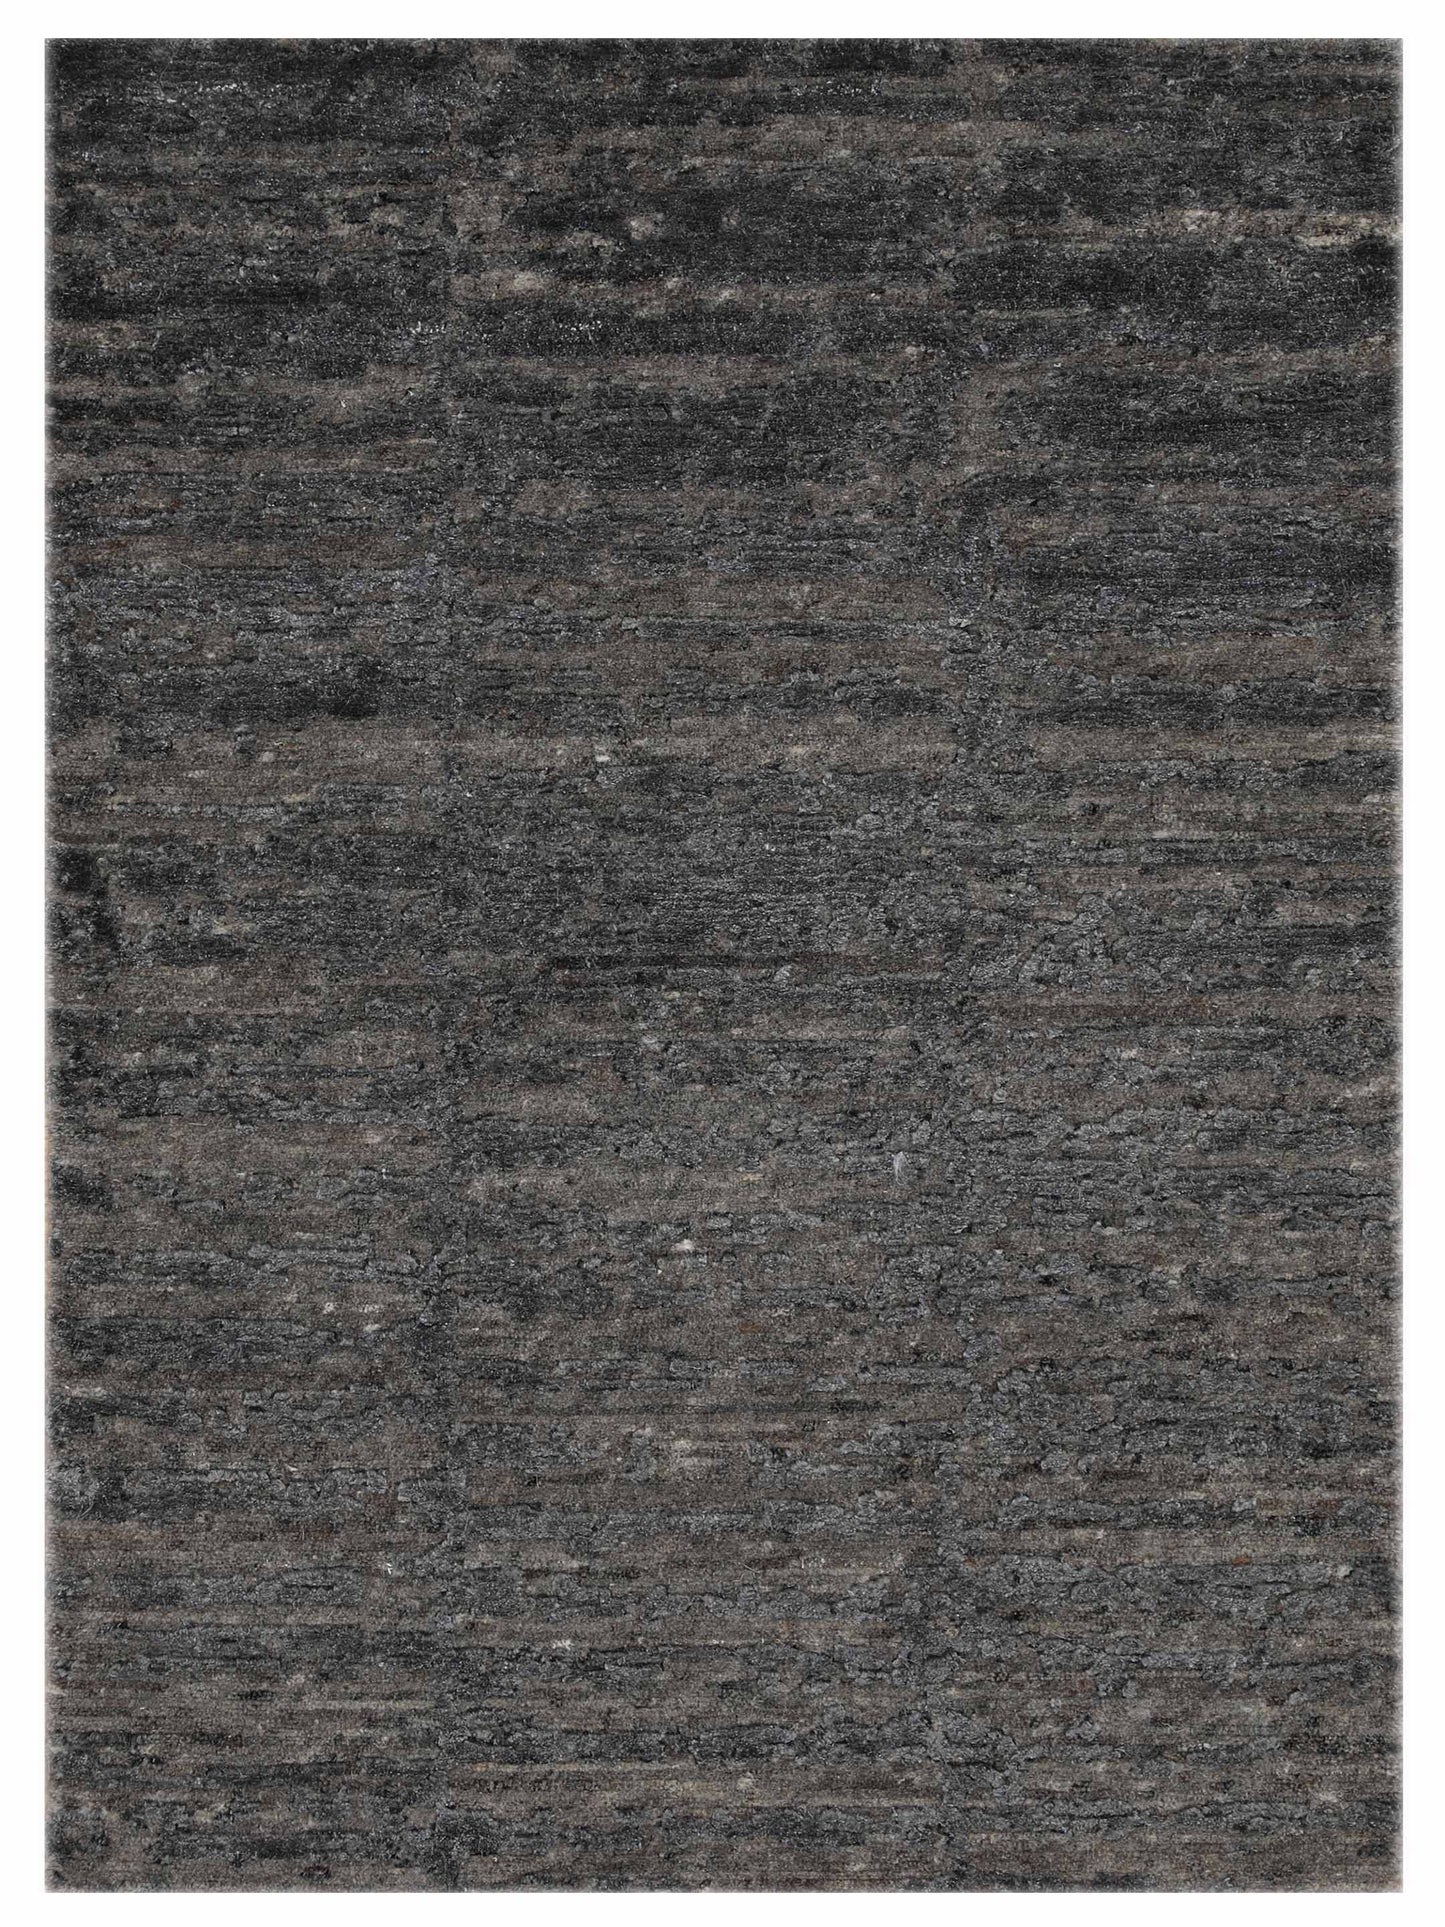 Artisan Mary MN-369 Stone Contemporary Knotted Rug